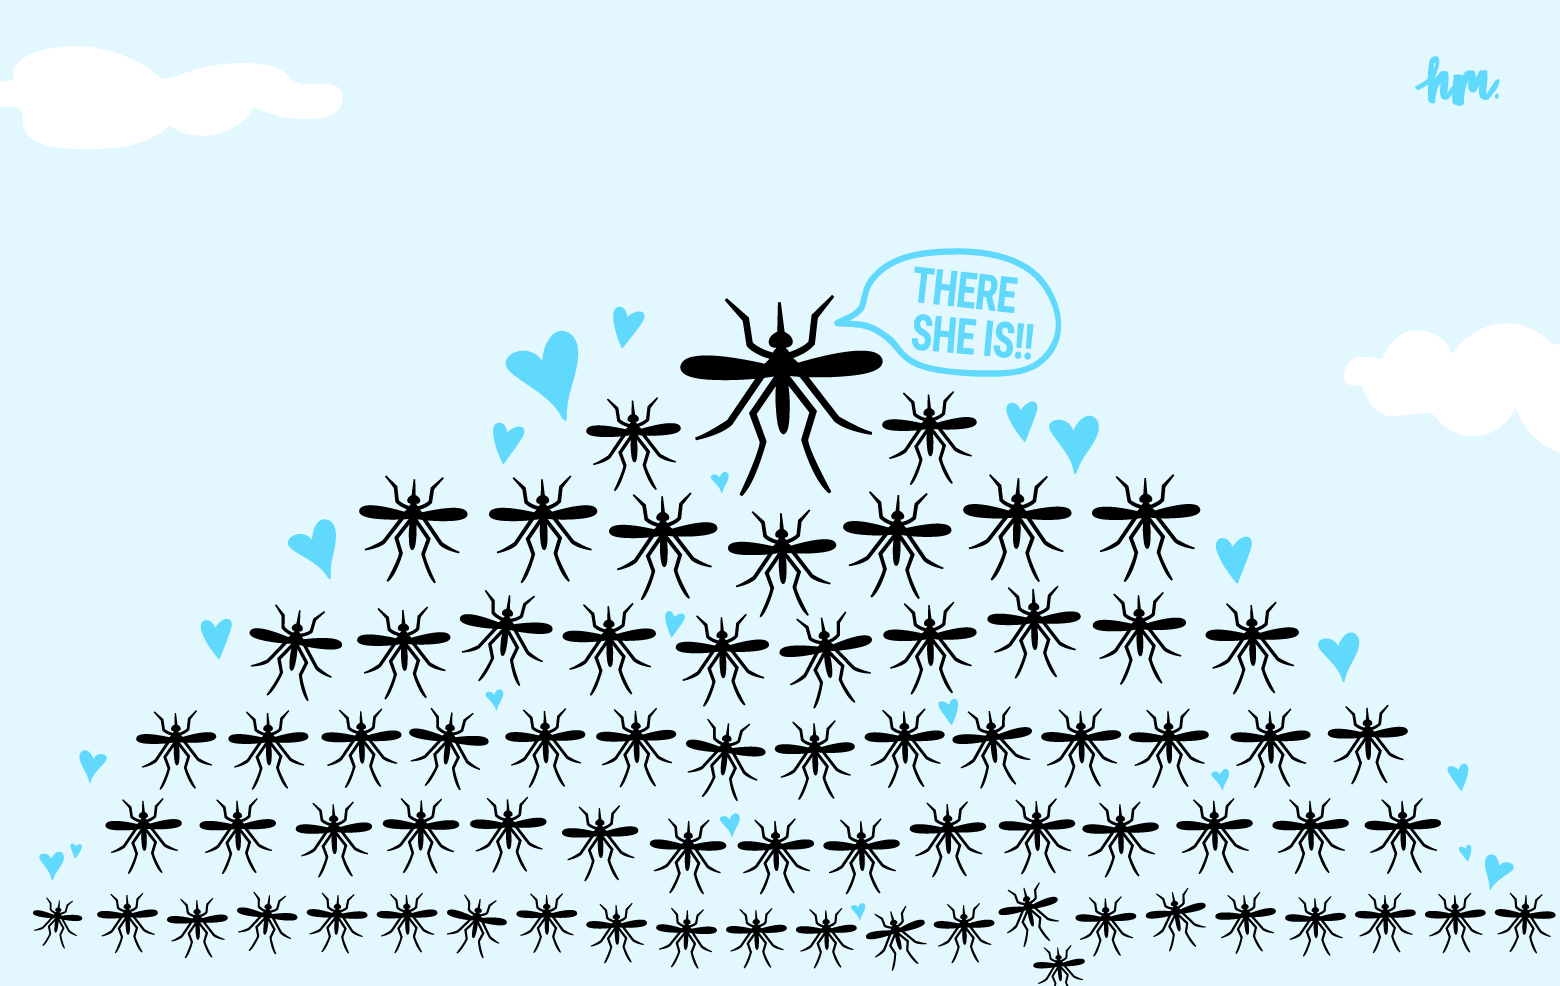 Illustration of a swarm of mosquitos in love.